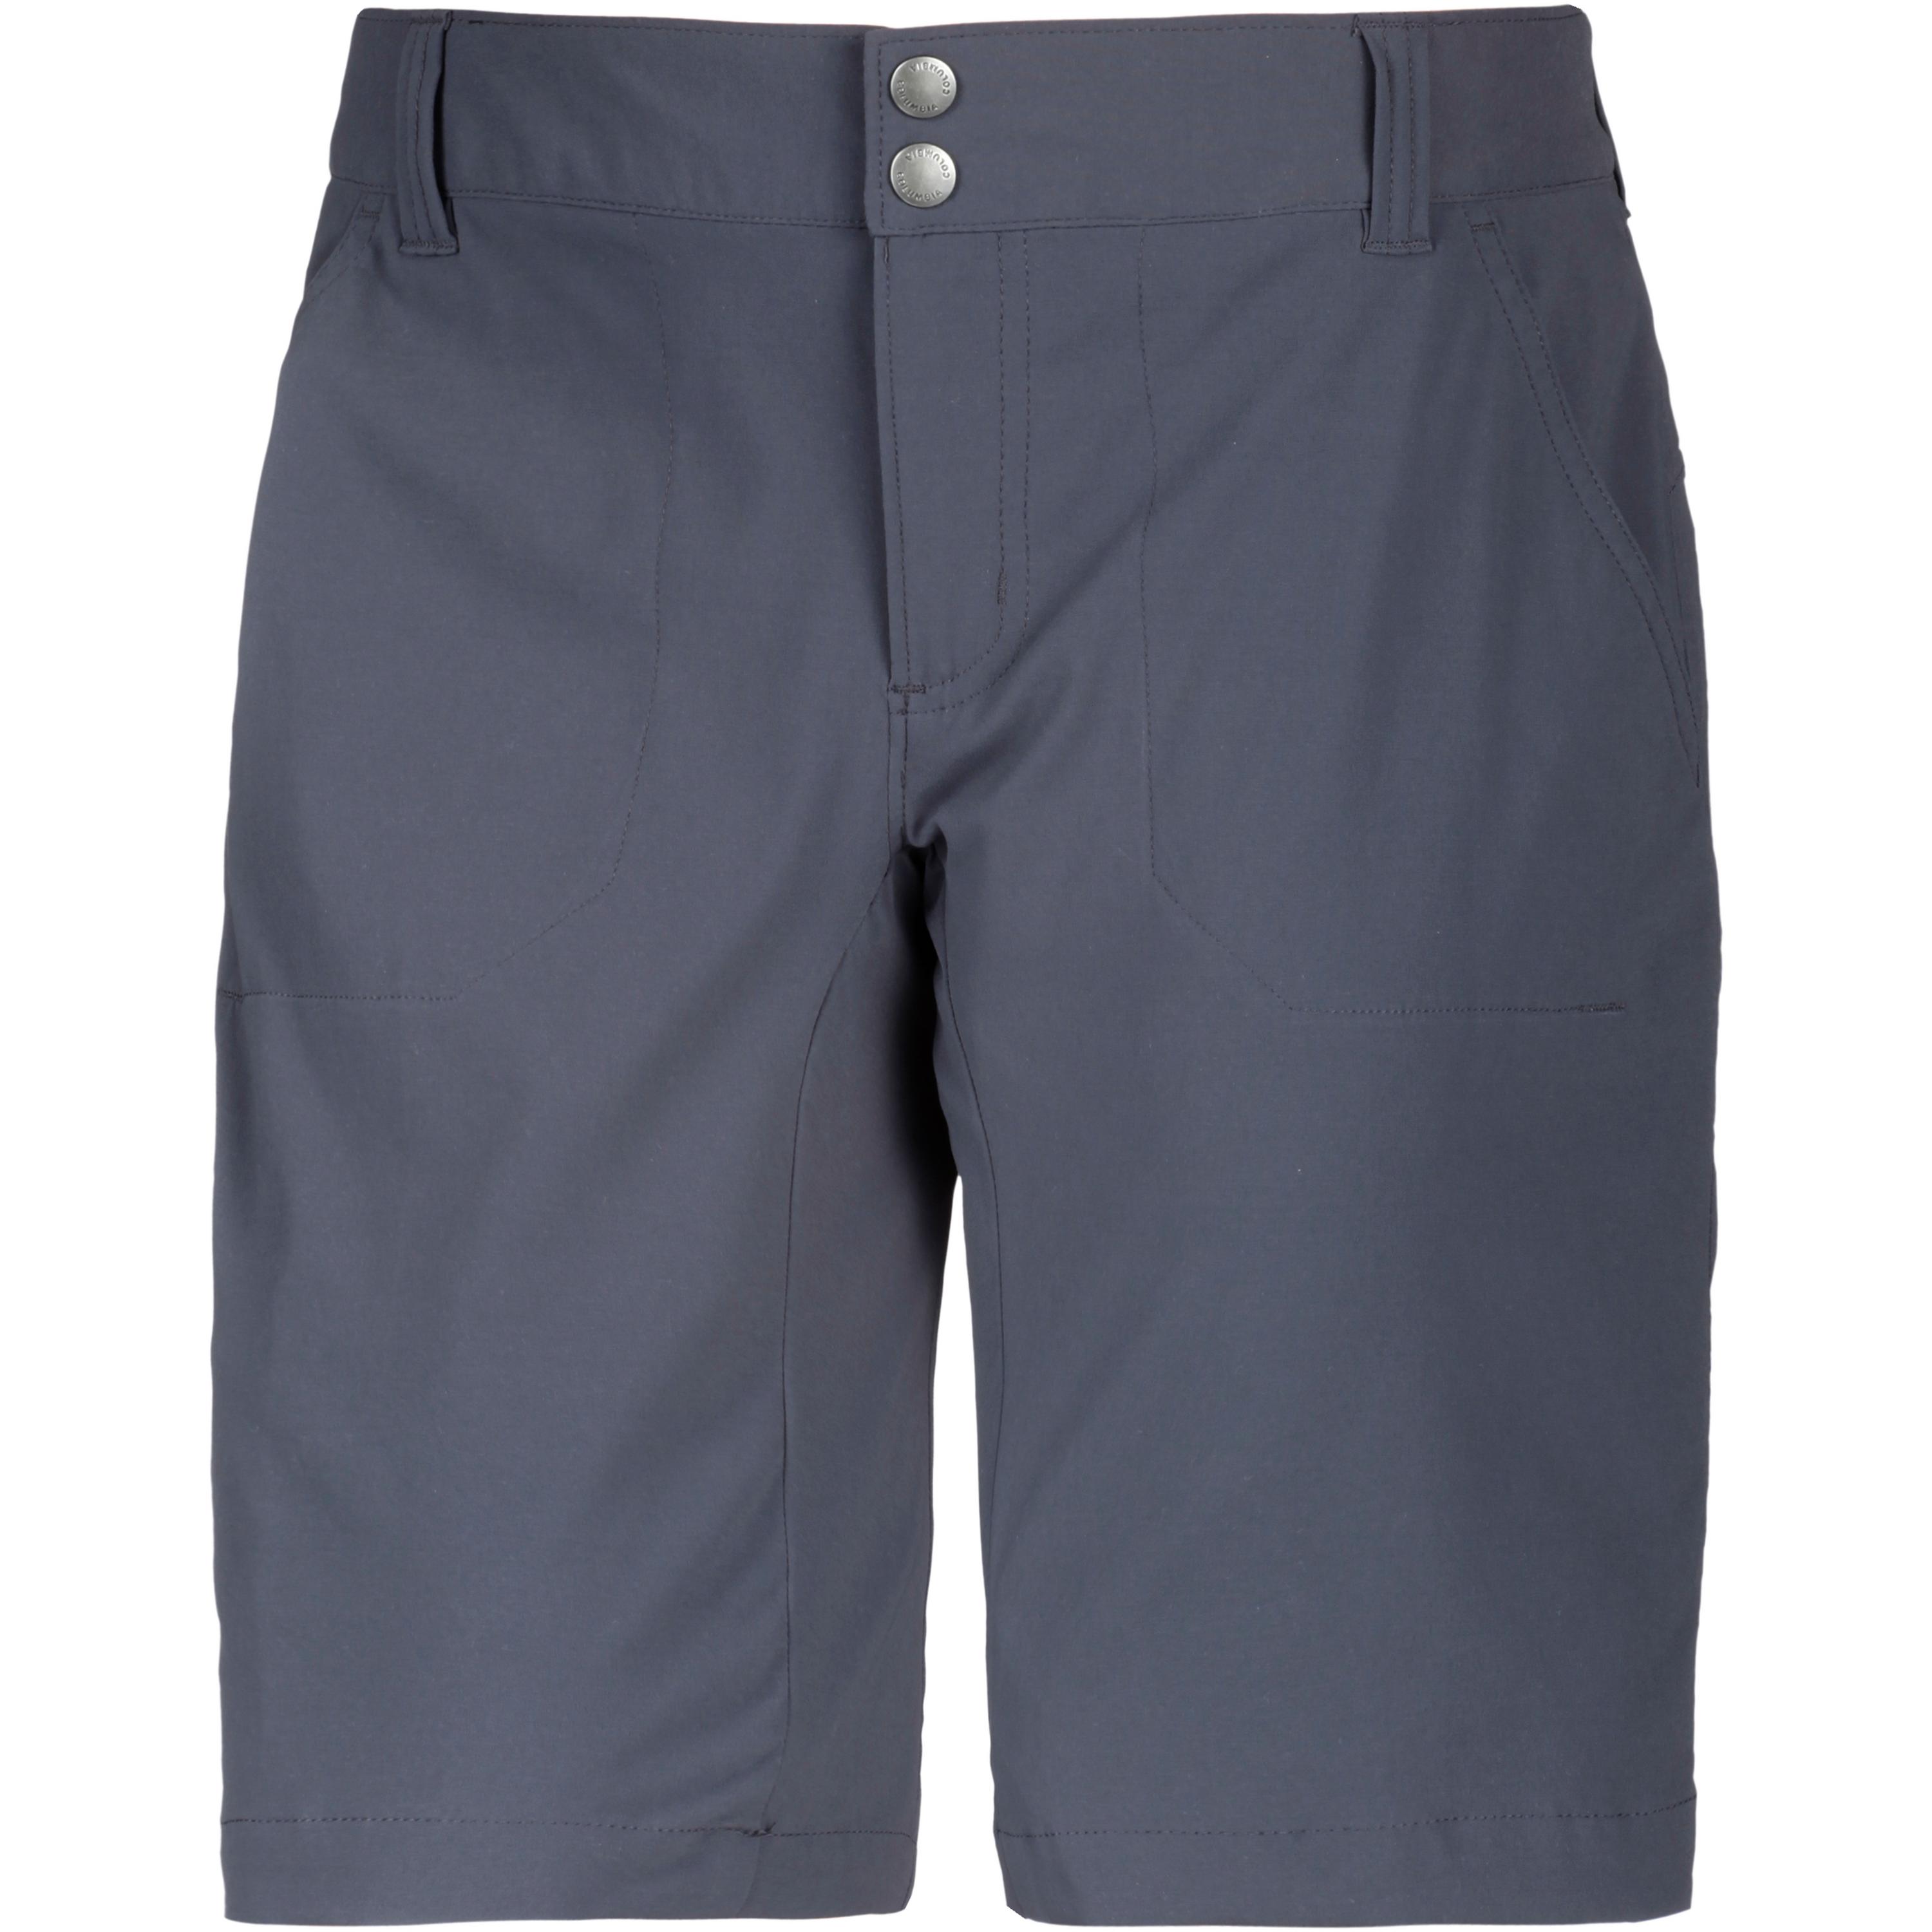 Image of Columbia SATURDAY TRAIL Funktionsshorts Damen